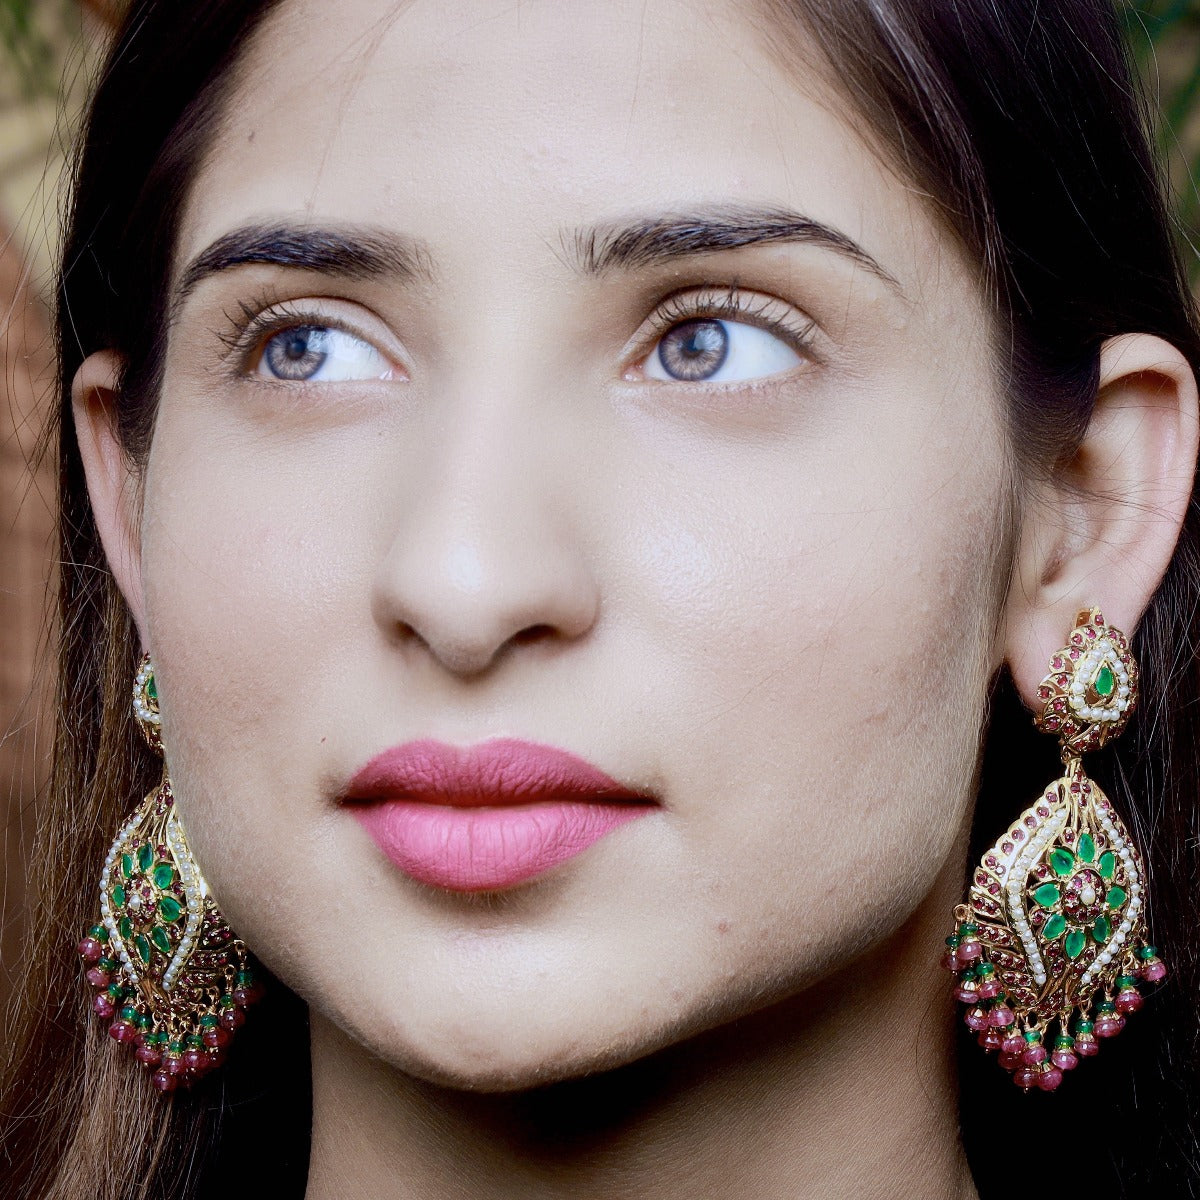 Emeralds Accentuated Jadau Earrings in Gold Plated Silver  ER 173